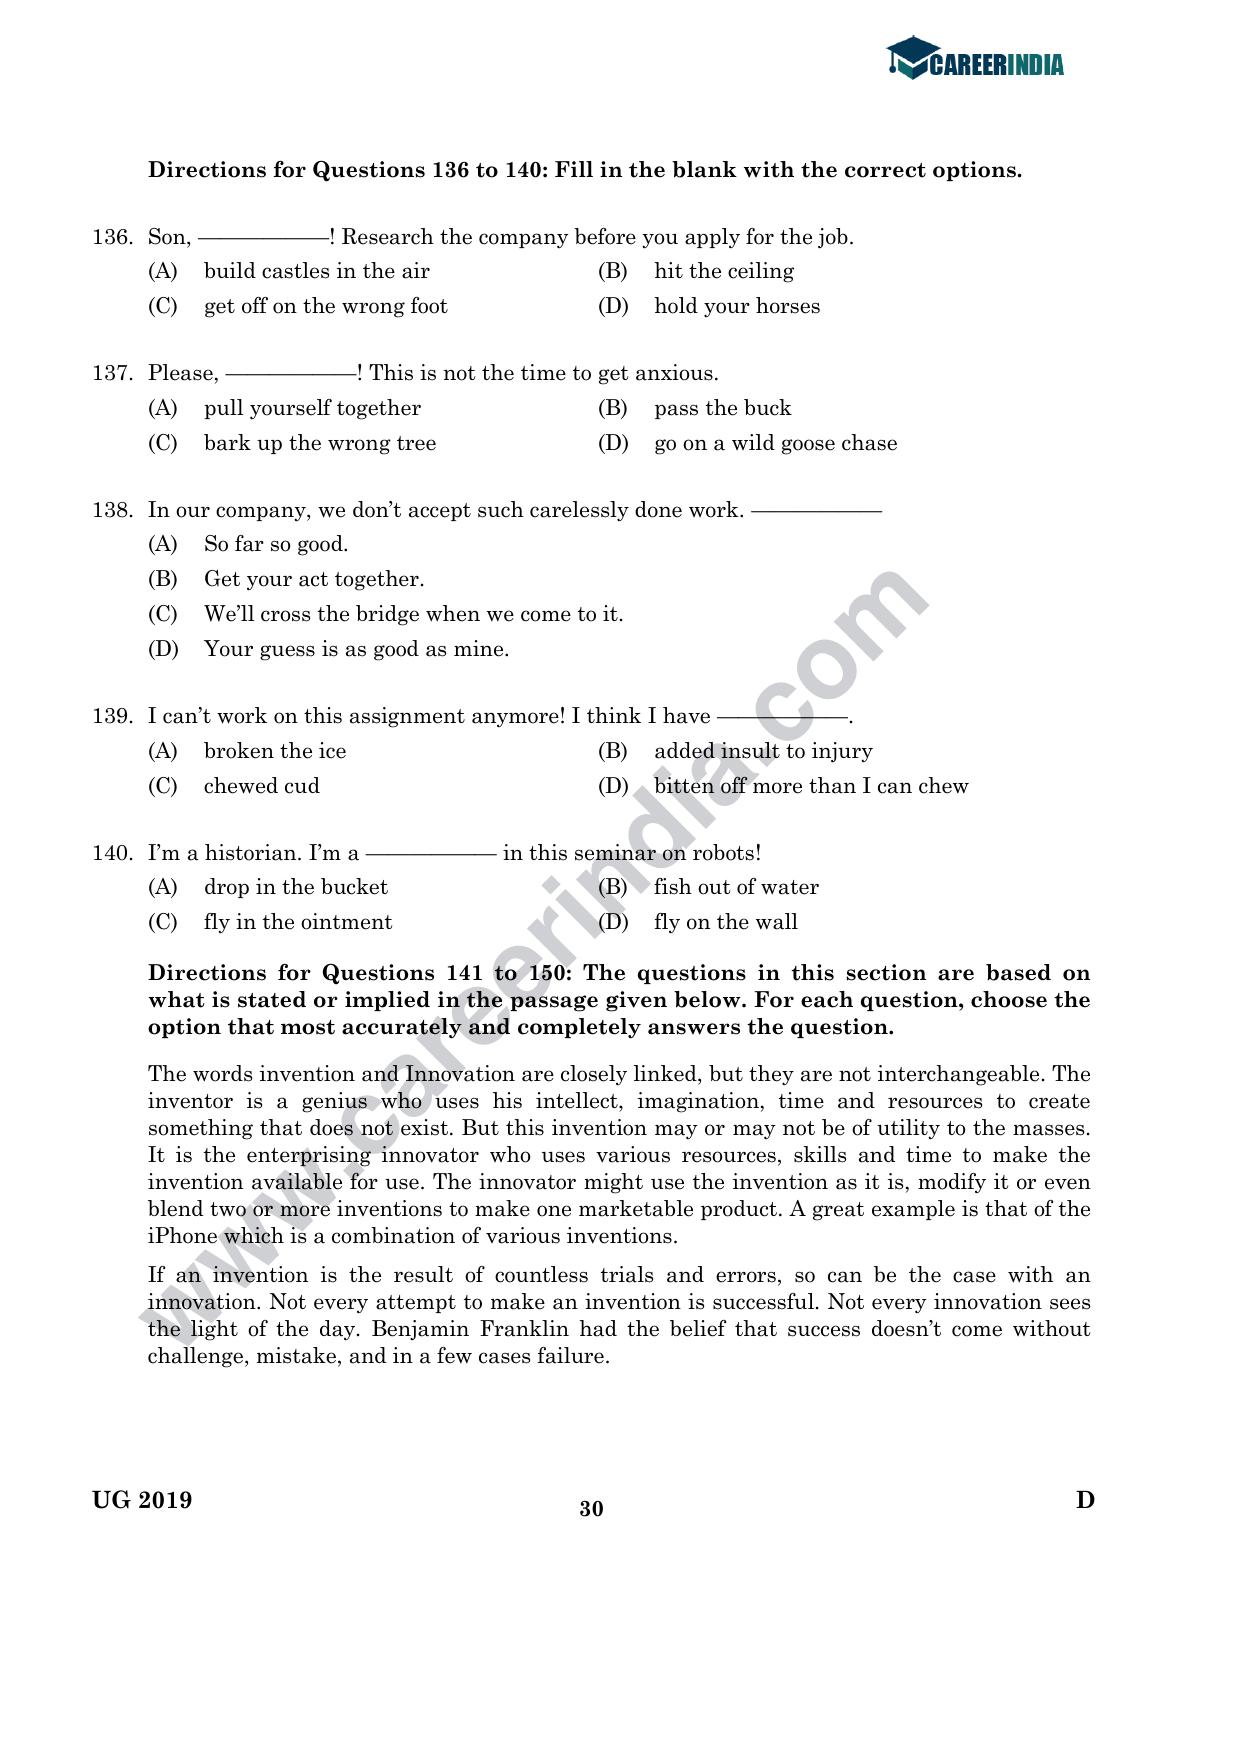 CLAT 2019 UG Logical-Reasoning Question Paper - Page 29